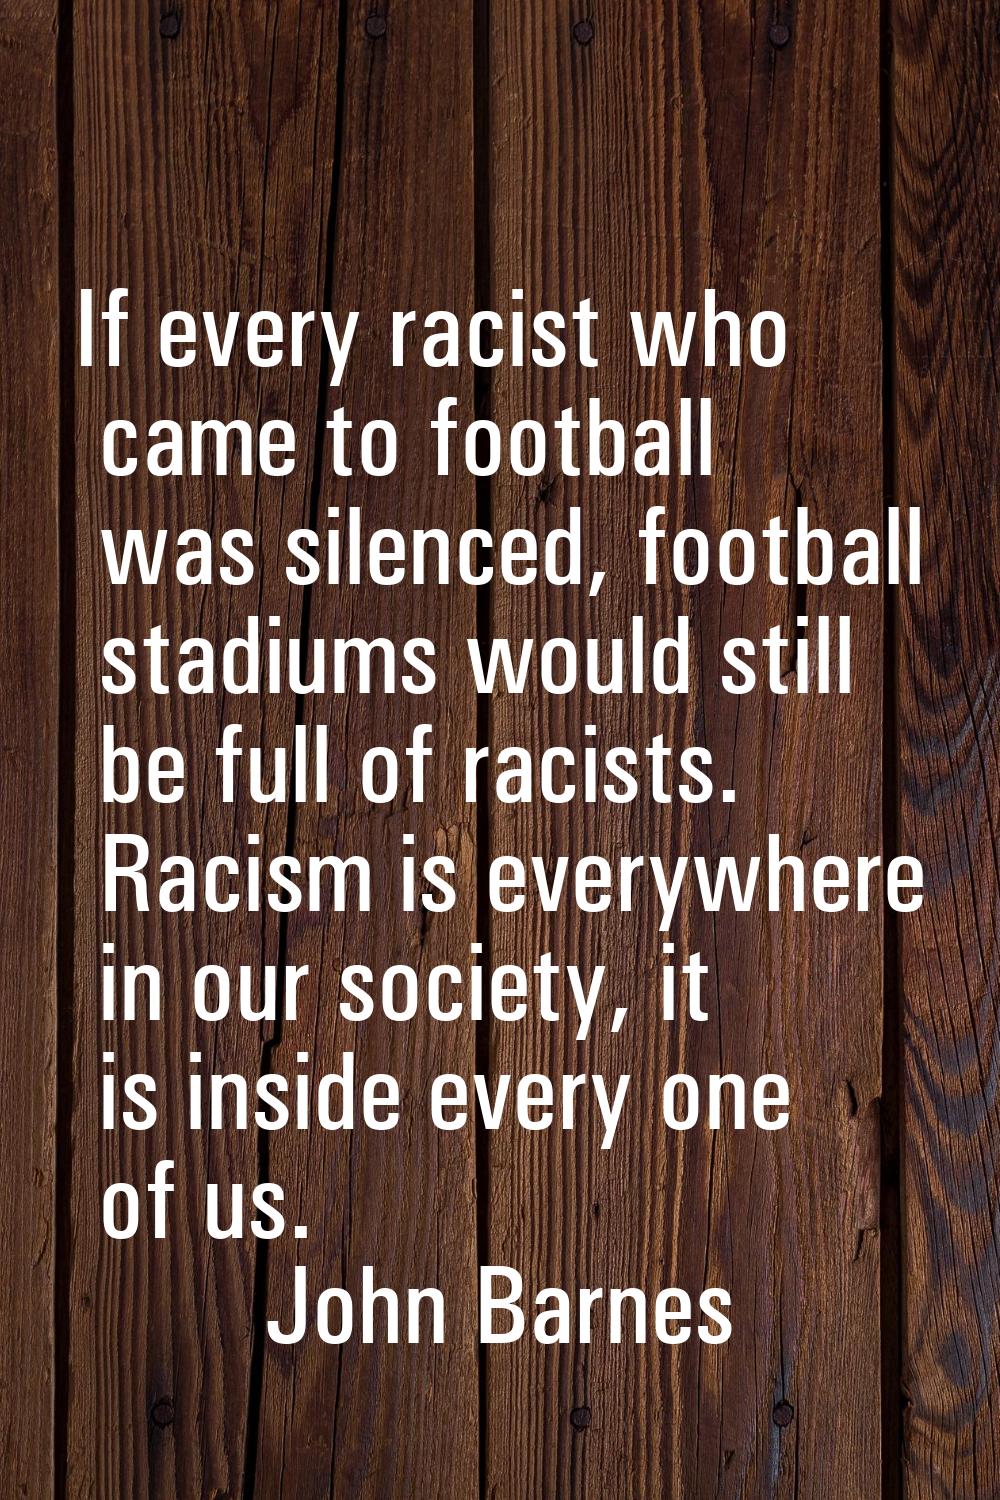 If every racist who came to football was silenced, football stadiums would still be full of racists